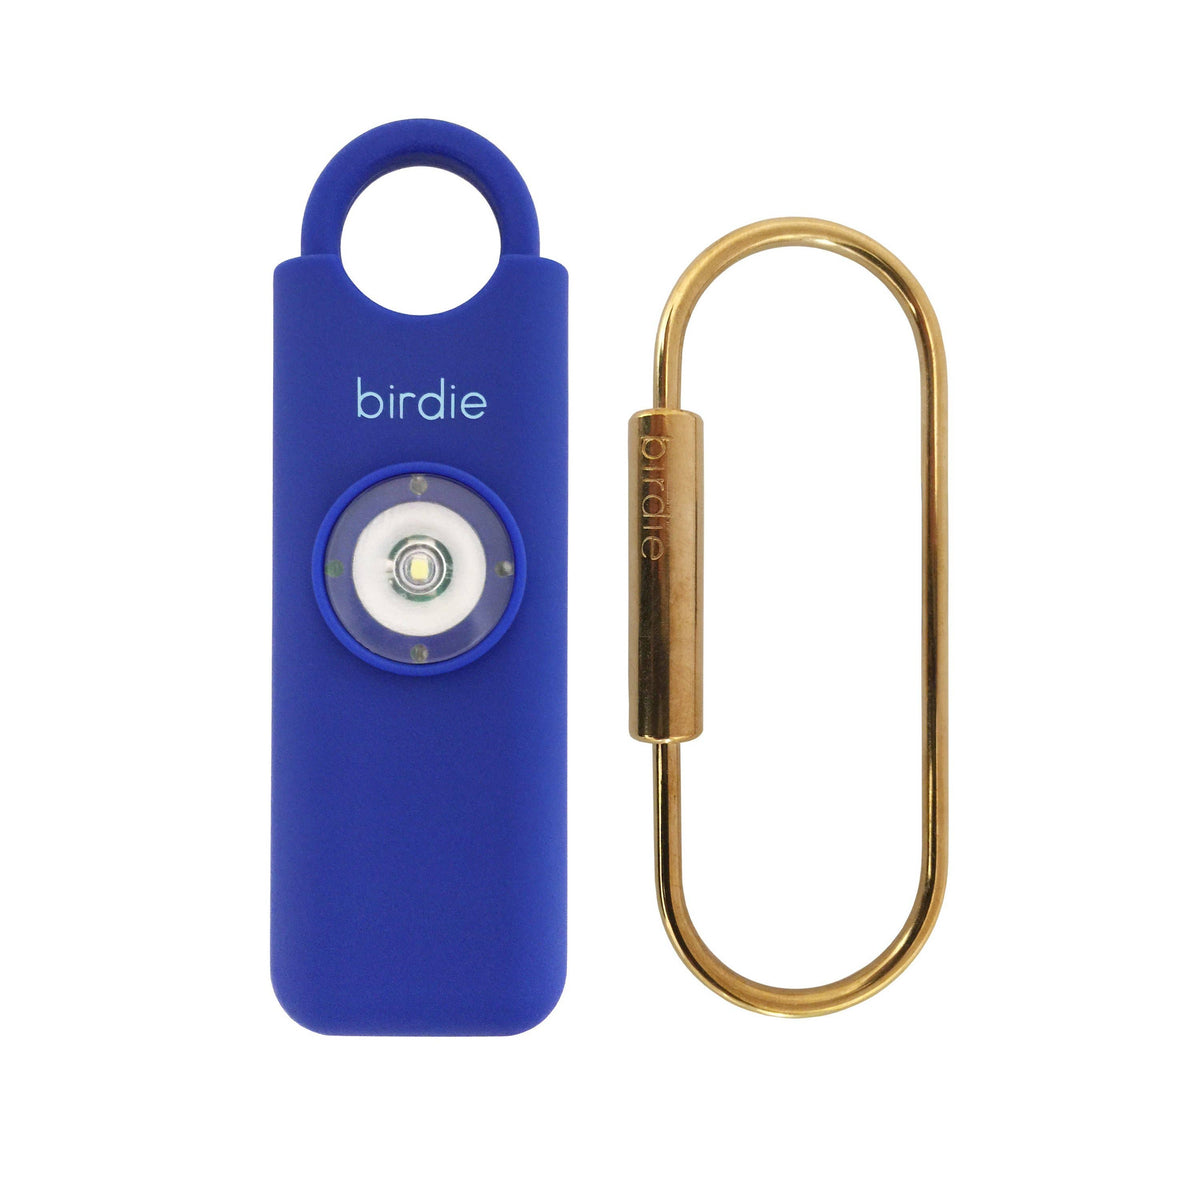 She's Birdie Personal Safety Alarm in Assorted Colors--Lemons and Limes Boutique